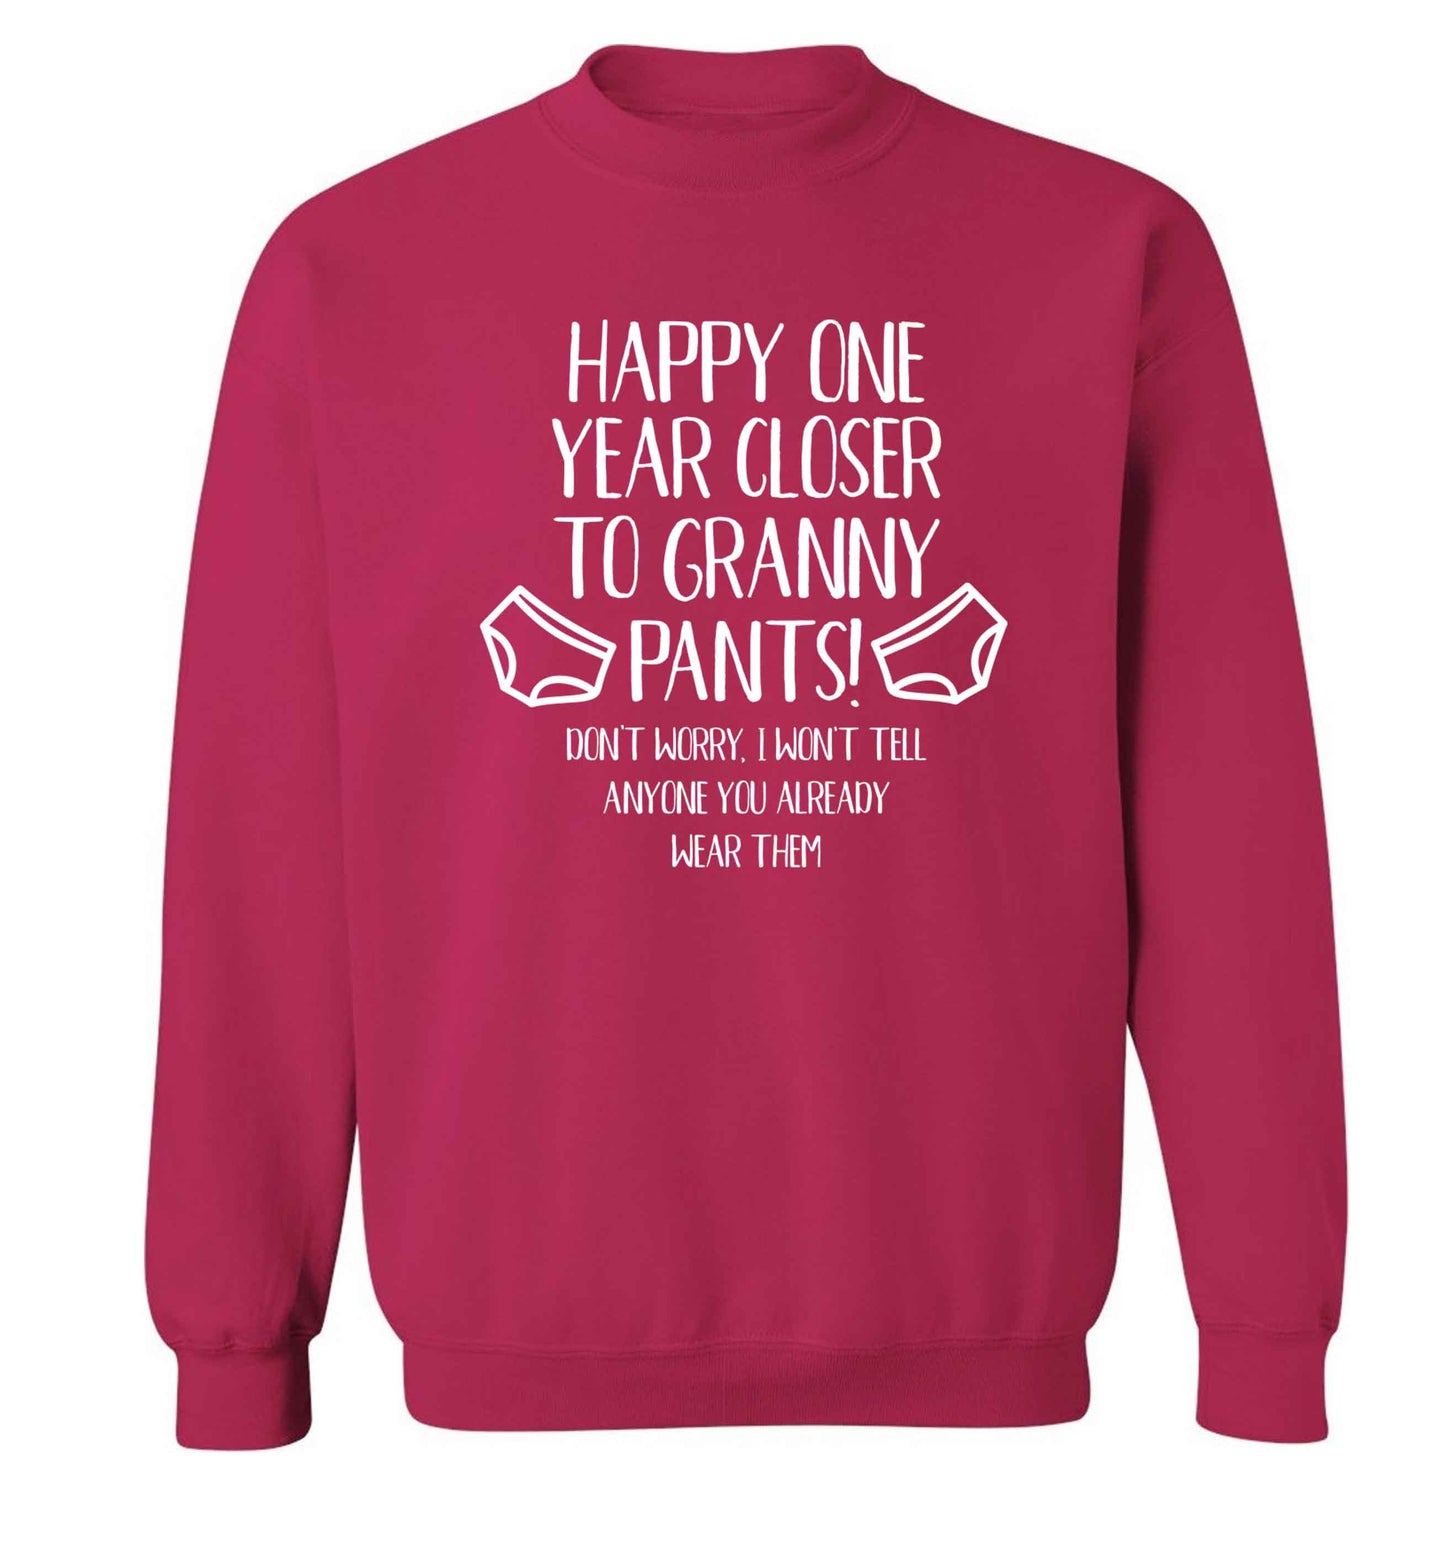 Happy one year closer to granny pants Adult's unisex pink Sweater 2XL